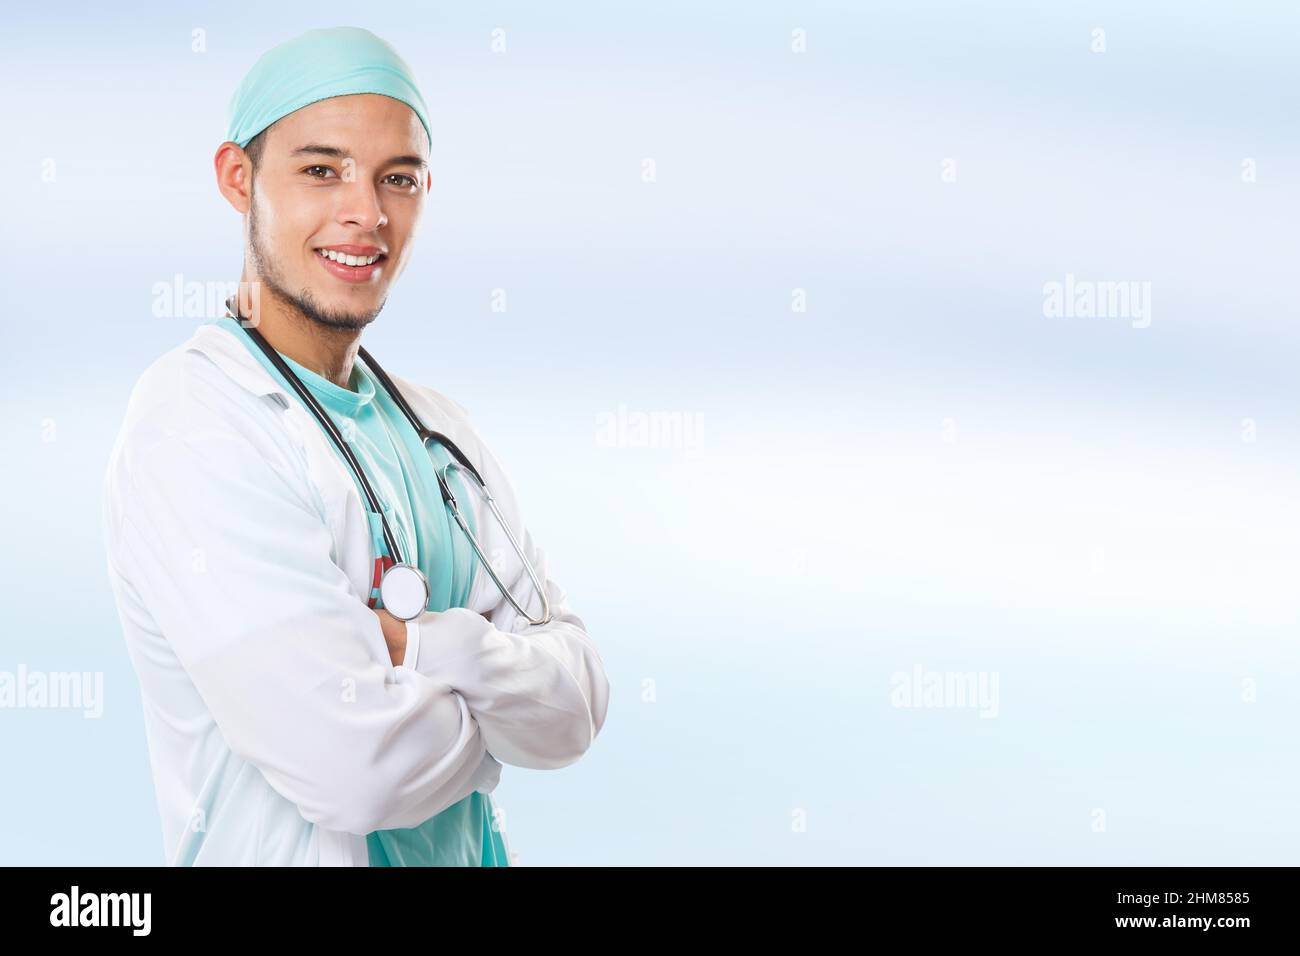 Young doctor portrait side view copyspace copy space occupation latin man job doctor's overall male Stock Photo